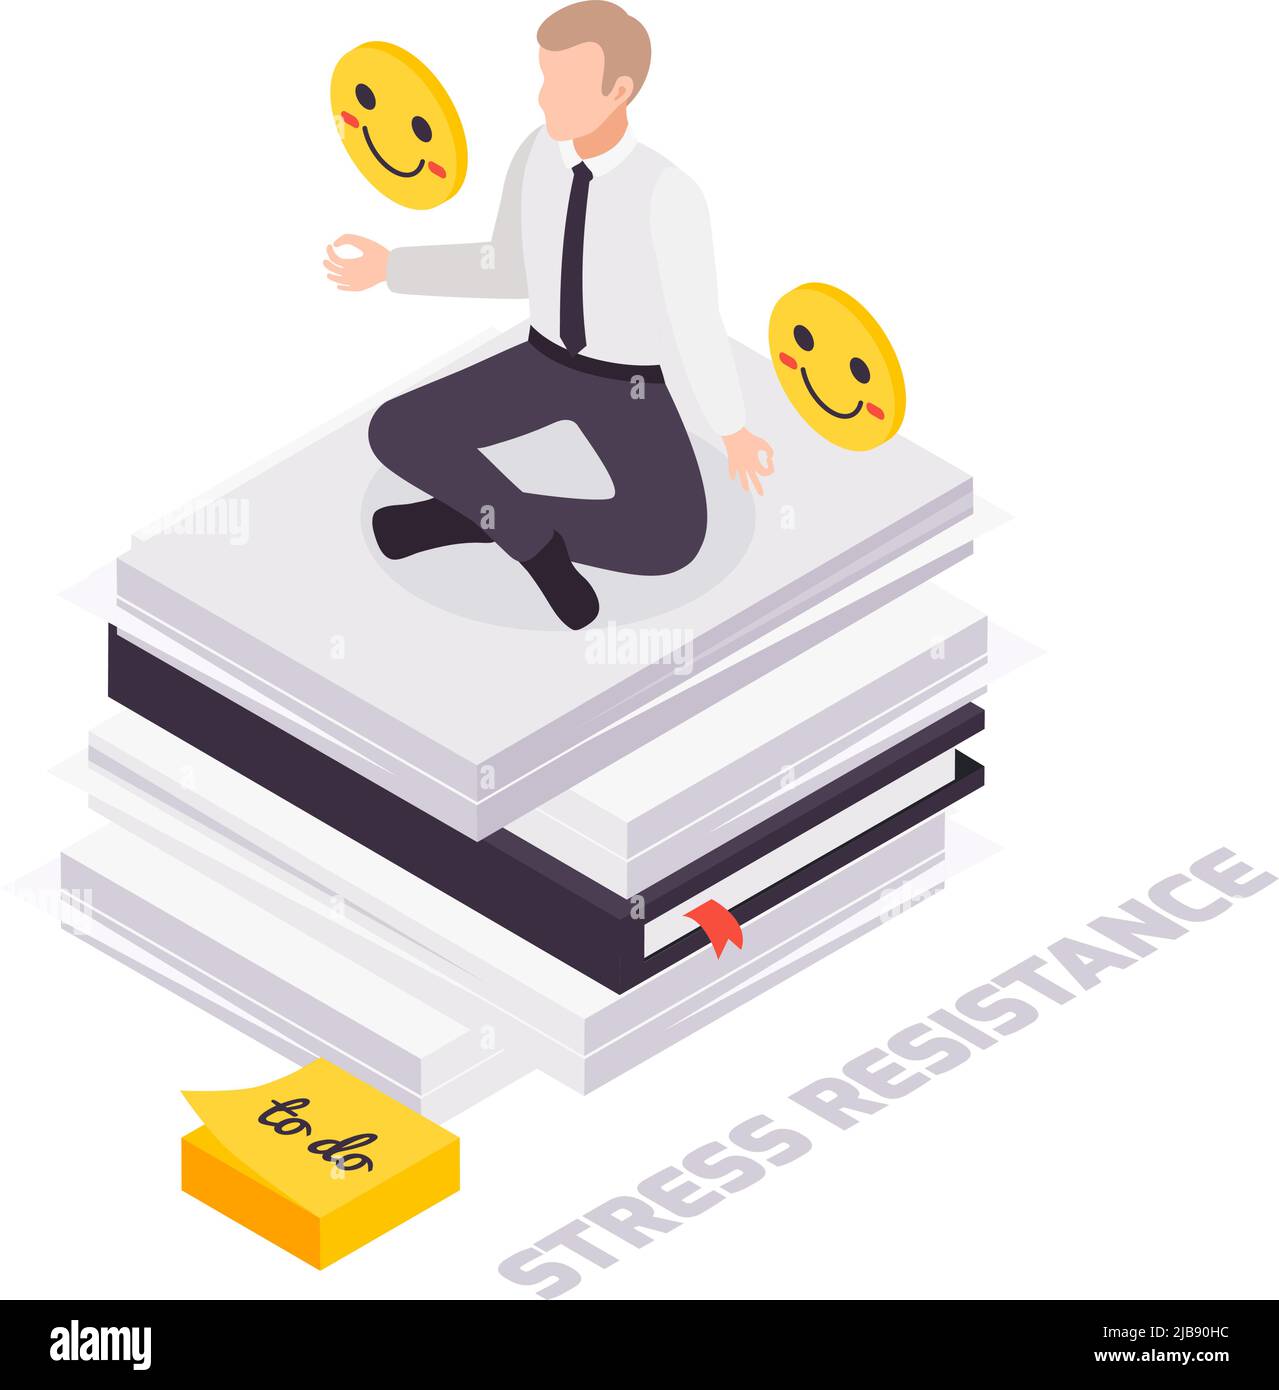 Soft skills isometric stress resistance concept with character sitting in lotus position on stack of papers vector illustration Stock Vector